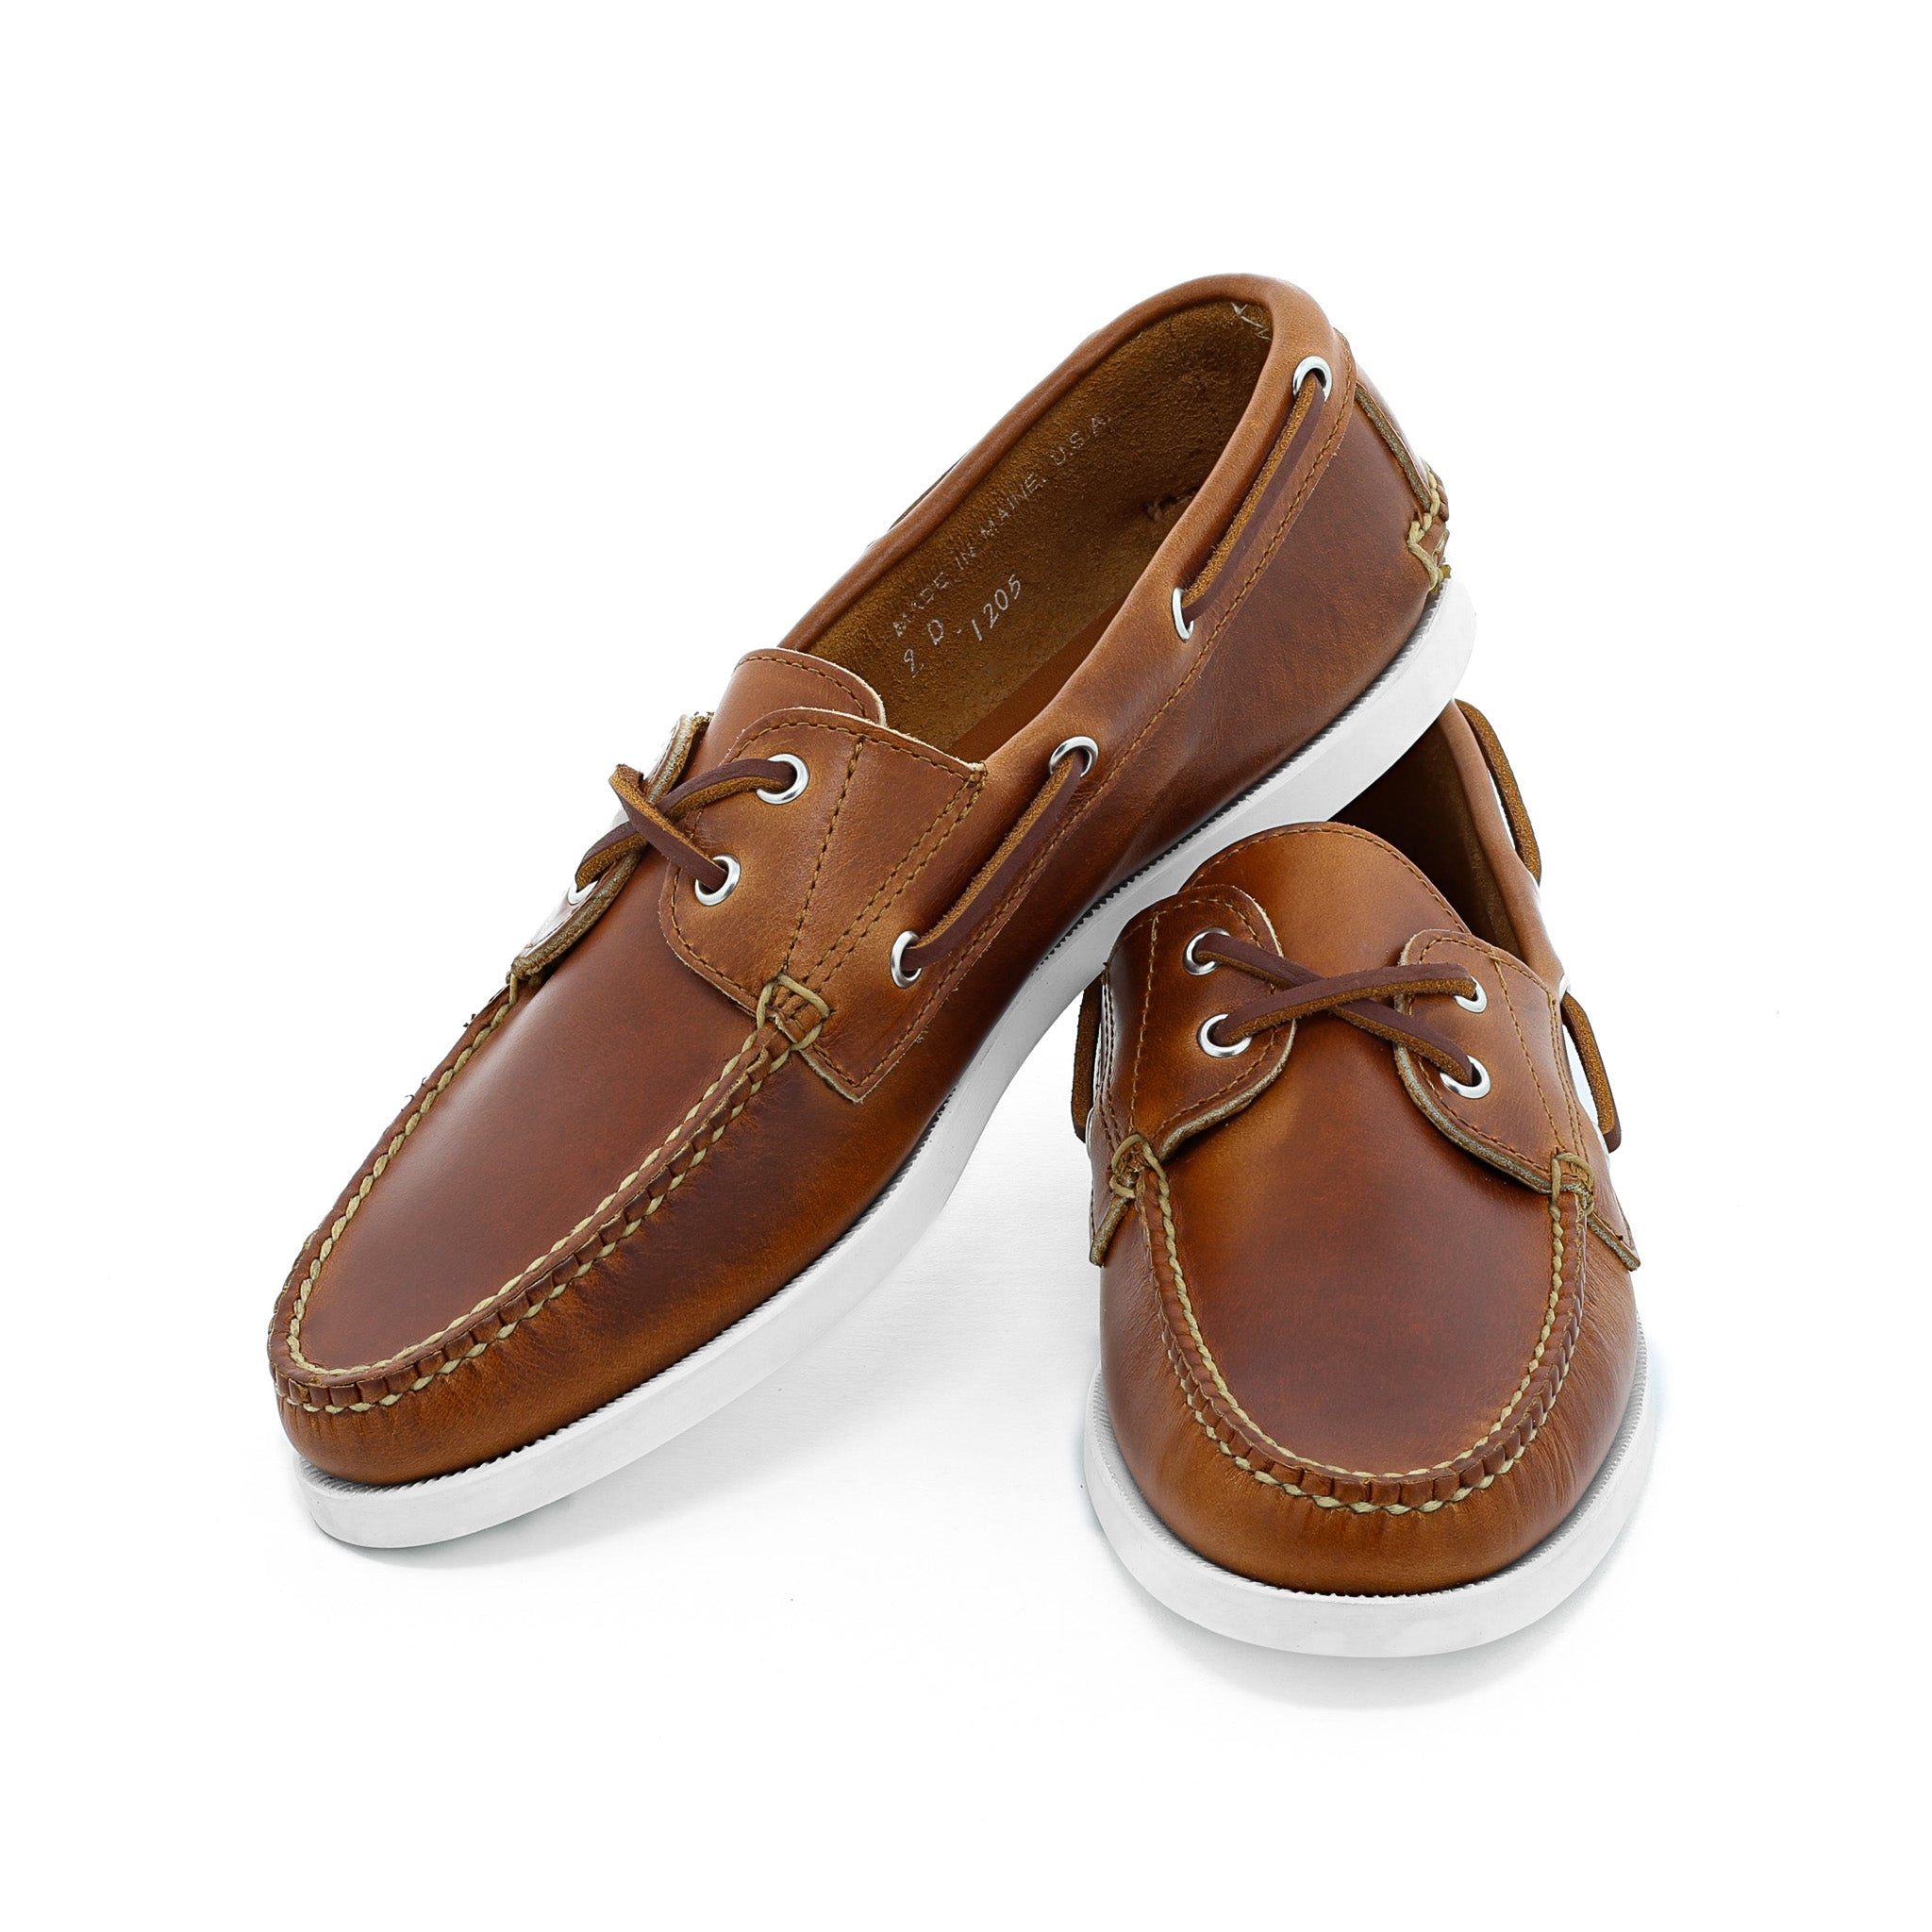 Special Event Boat Shoes